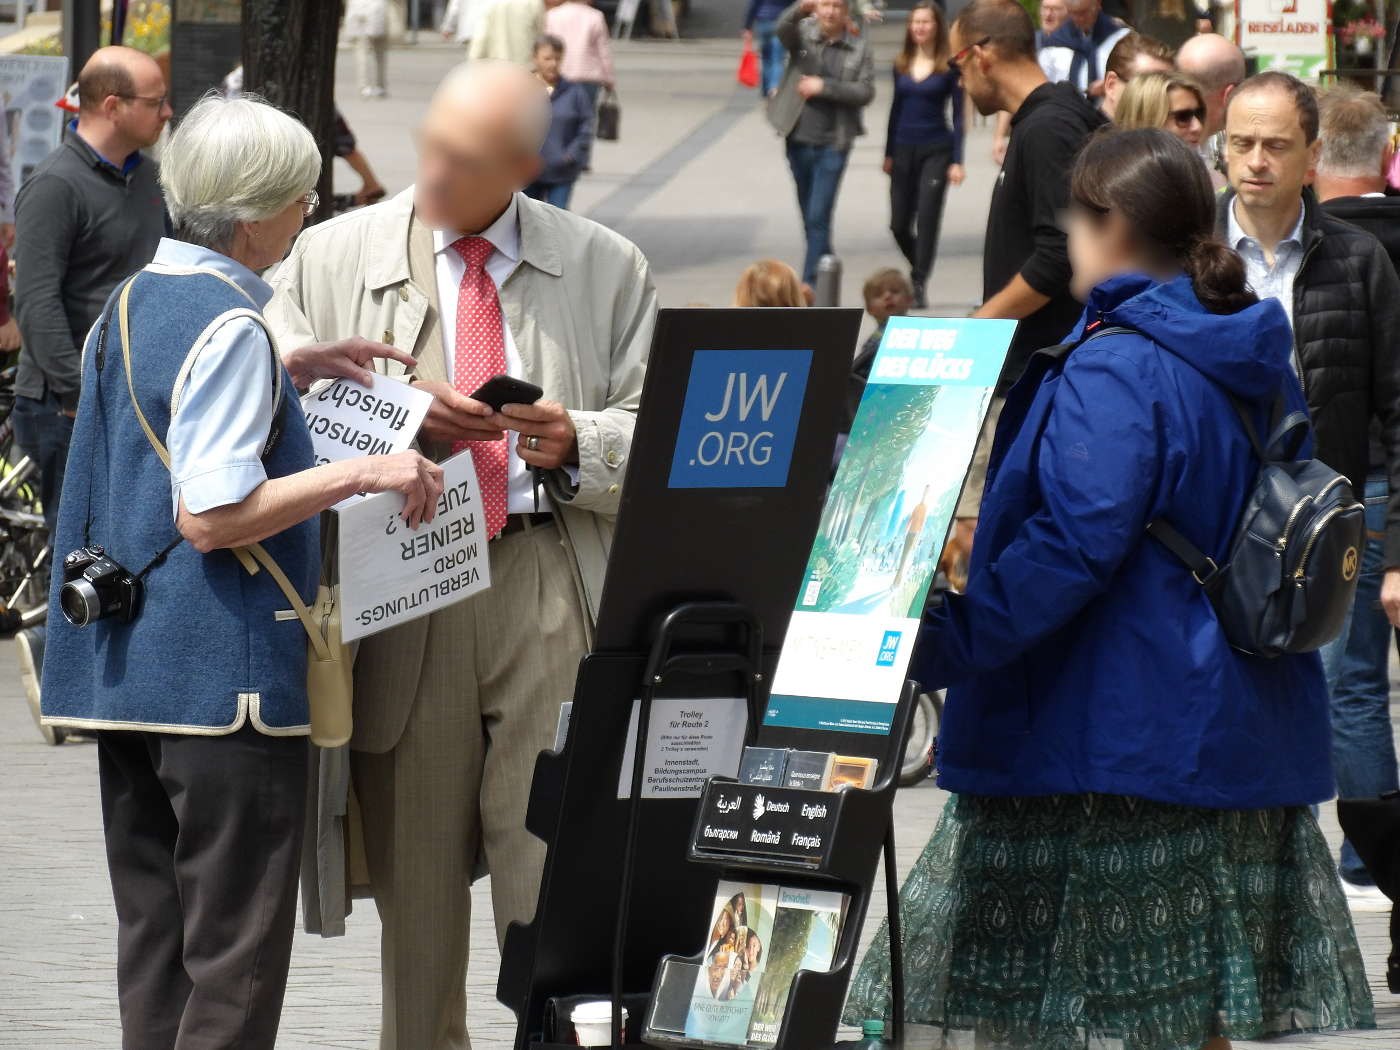 Jehovah's Witnesses: "Move along, please!"